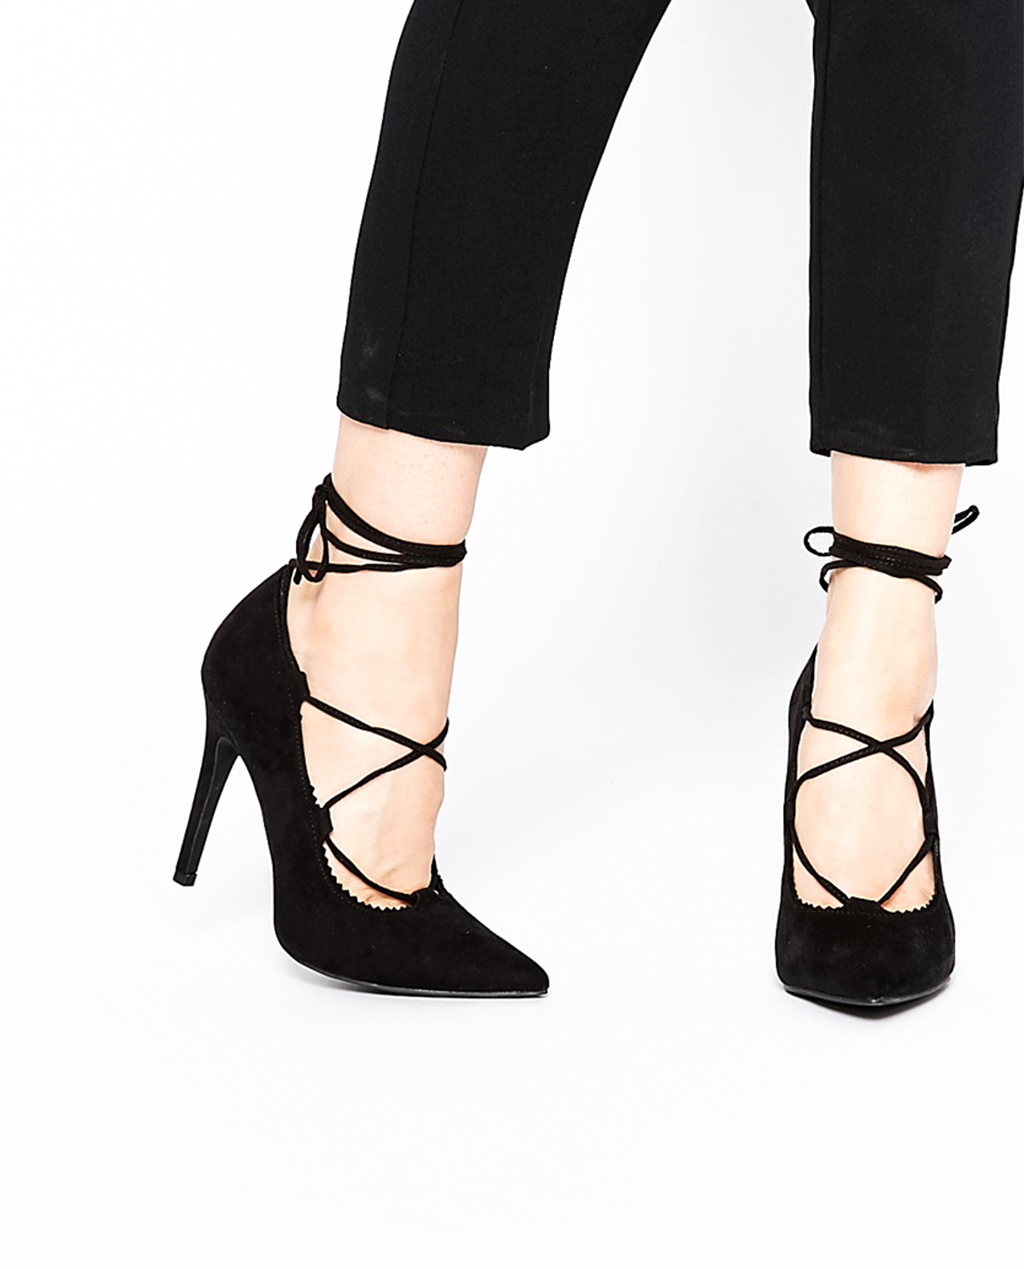 LACE UP HEELS